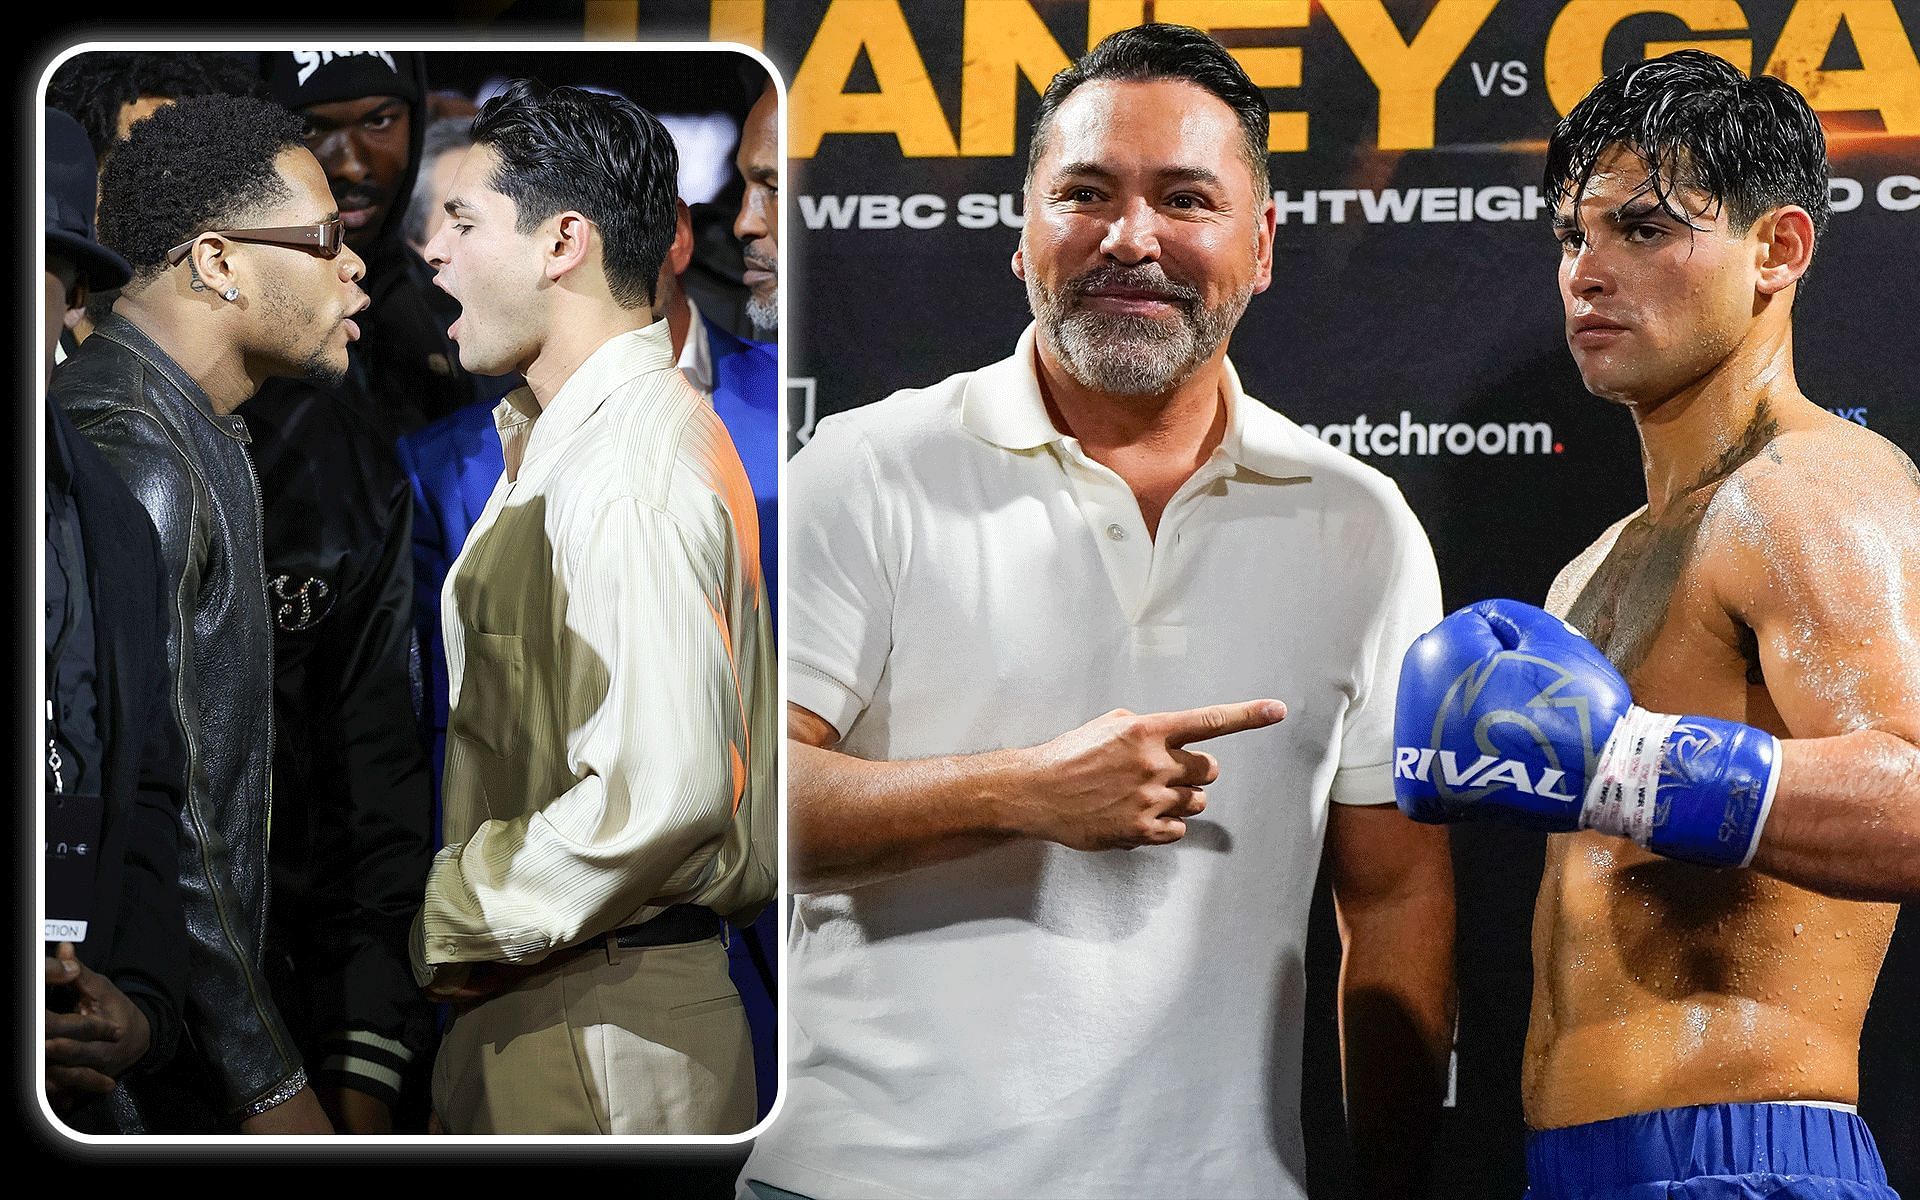 Devin Haney (far left) will box Ryan Garcia (second from left) this month; Oscar De La Hoya (second from right) serves as the promoter for Garcia (far right) [Images courtesy: Getty Images]